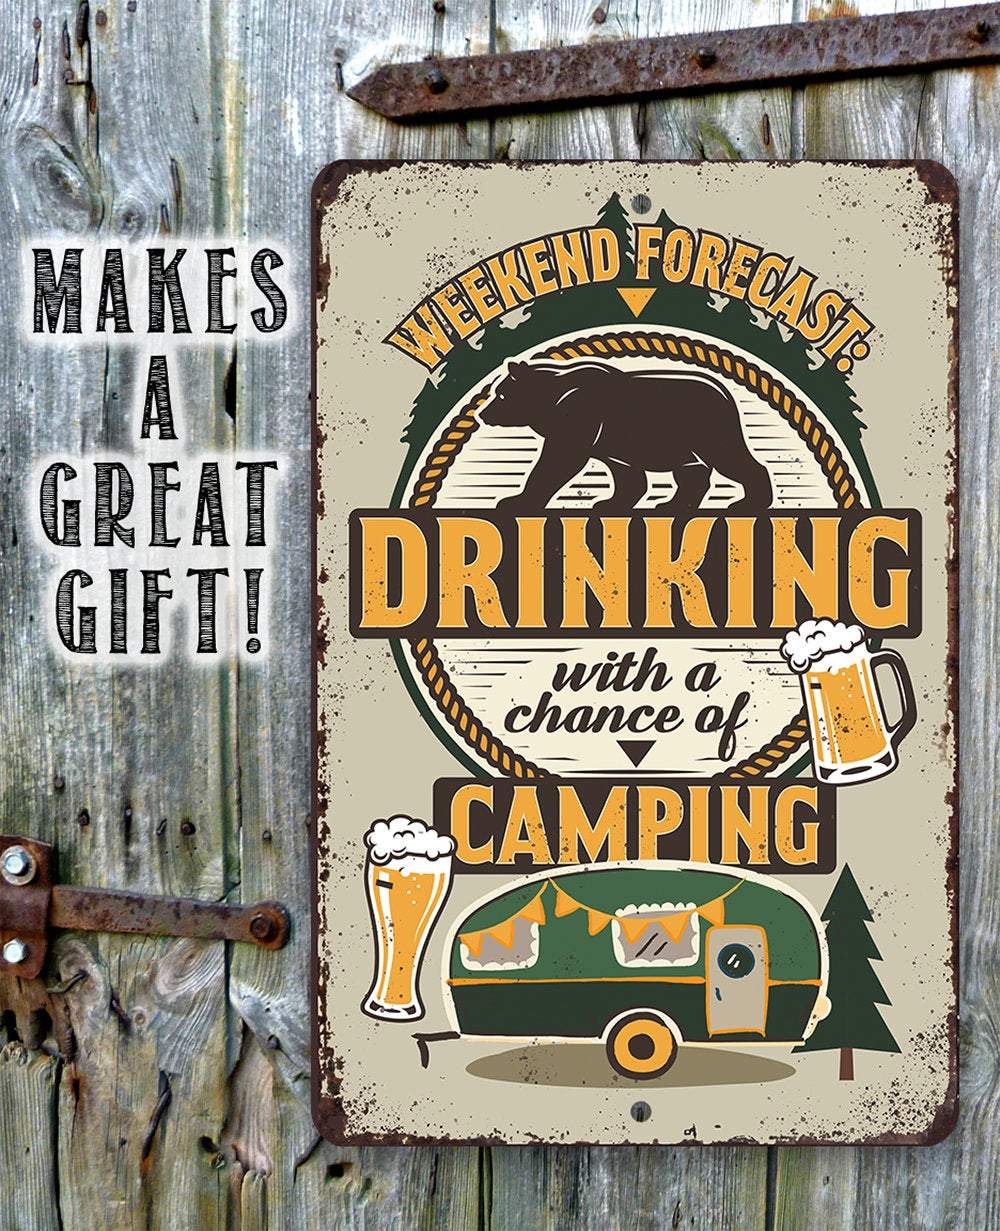 Weekend Forecast Camping and Drinking Bear and Beer - Metal Sign | Lone Star Art.